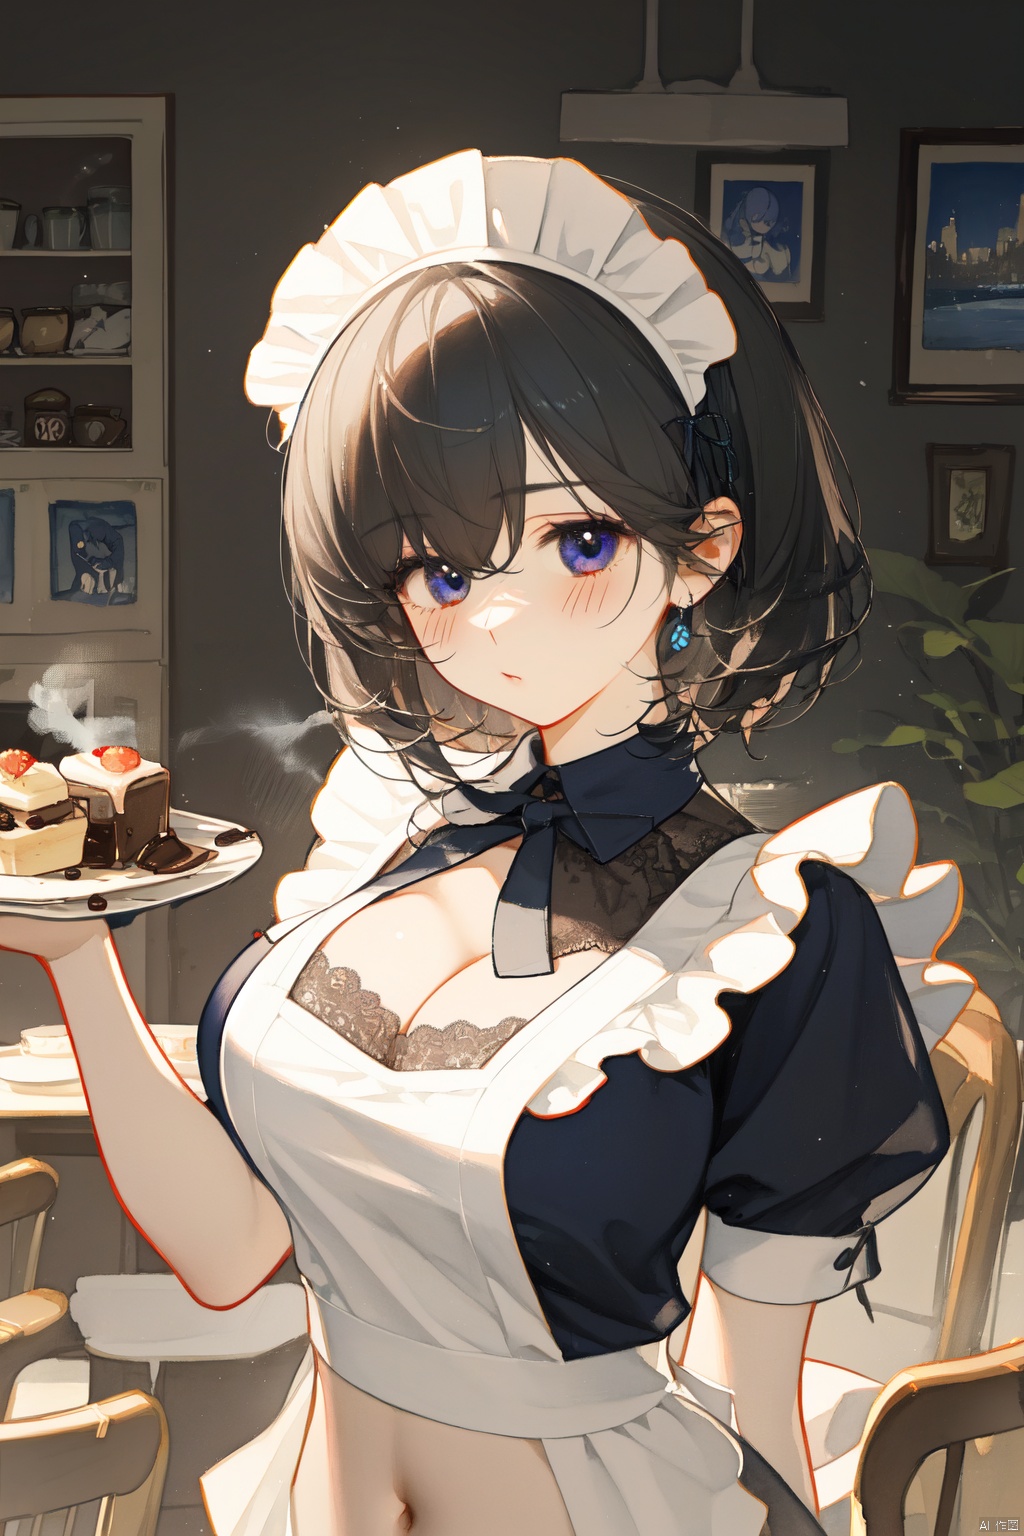 (((Maid Cafe Art))), ((Watercolor painting)), Maid cafe, ((Best quality)), Low angle view, ((Illustration)), (1 girl),blush, big breast, holding a coffee tray, beautiful detailed maid cafe interior, looking at viewer,naked withand white apron, very close to viewers, bare shoulders, lace headband, short bob hair, upper body, lens flare, light leaks, detailed beautiful coffee cups and desserts, maid cafe, black hair, ((Steam)), rising steam flow, navel, (Beautiful detailed eyes), backlight